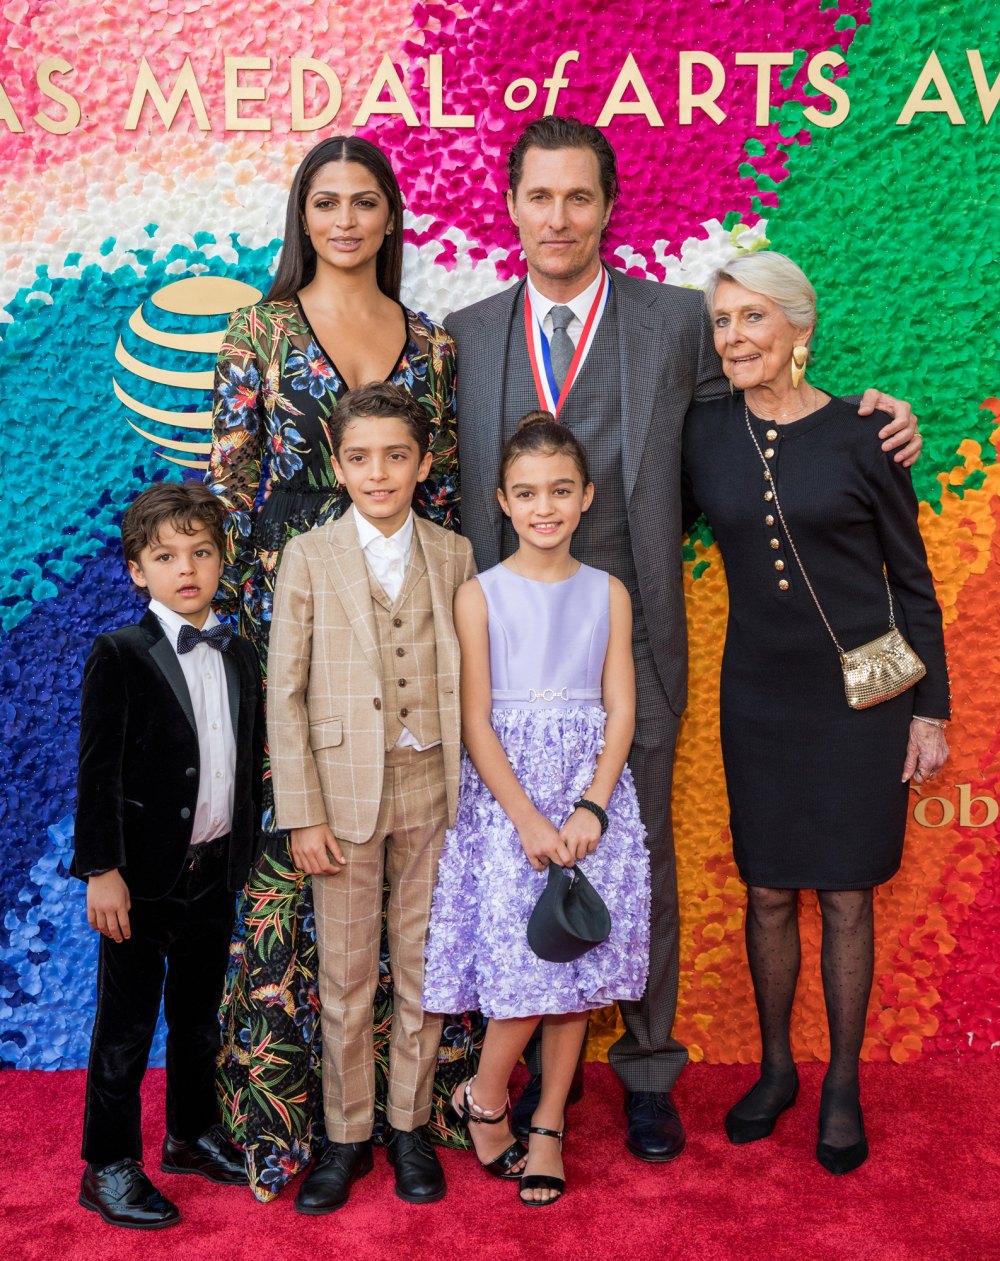 Matthew McConaughey and his wife Camila appear on the red carpet with children